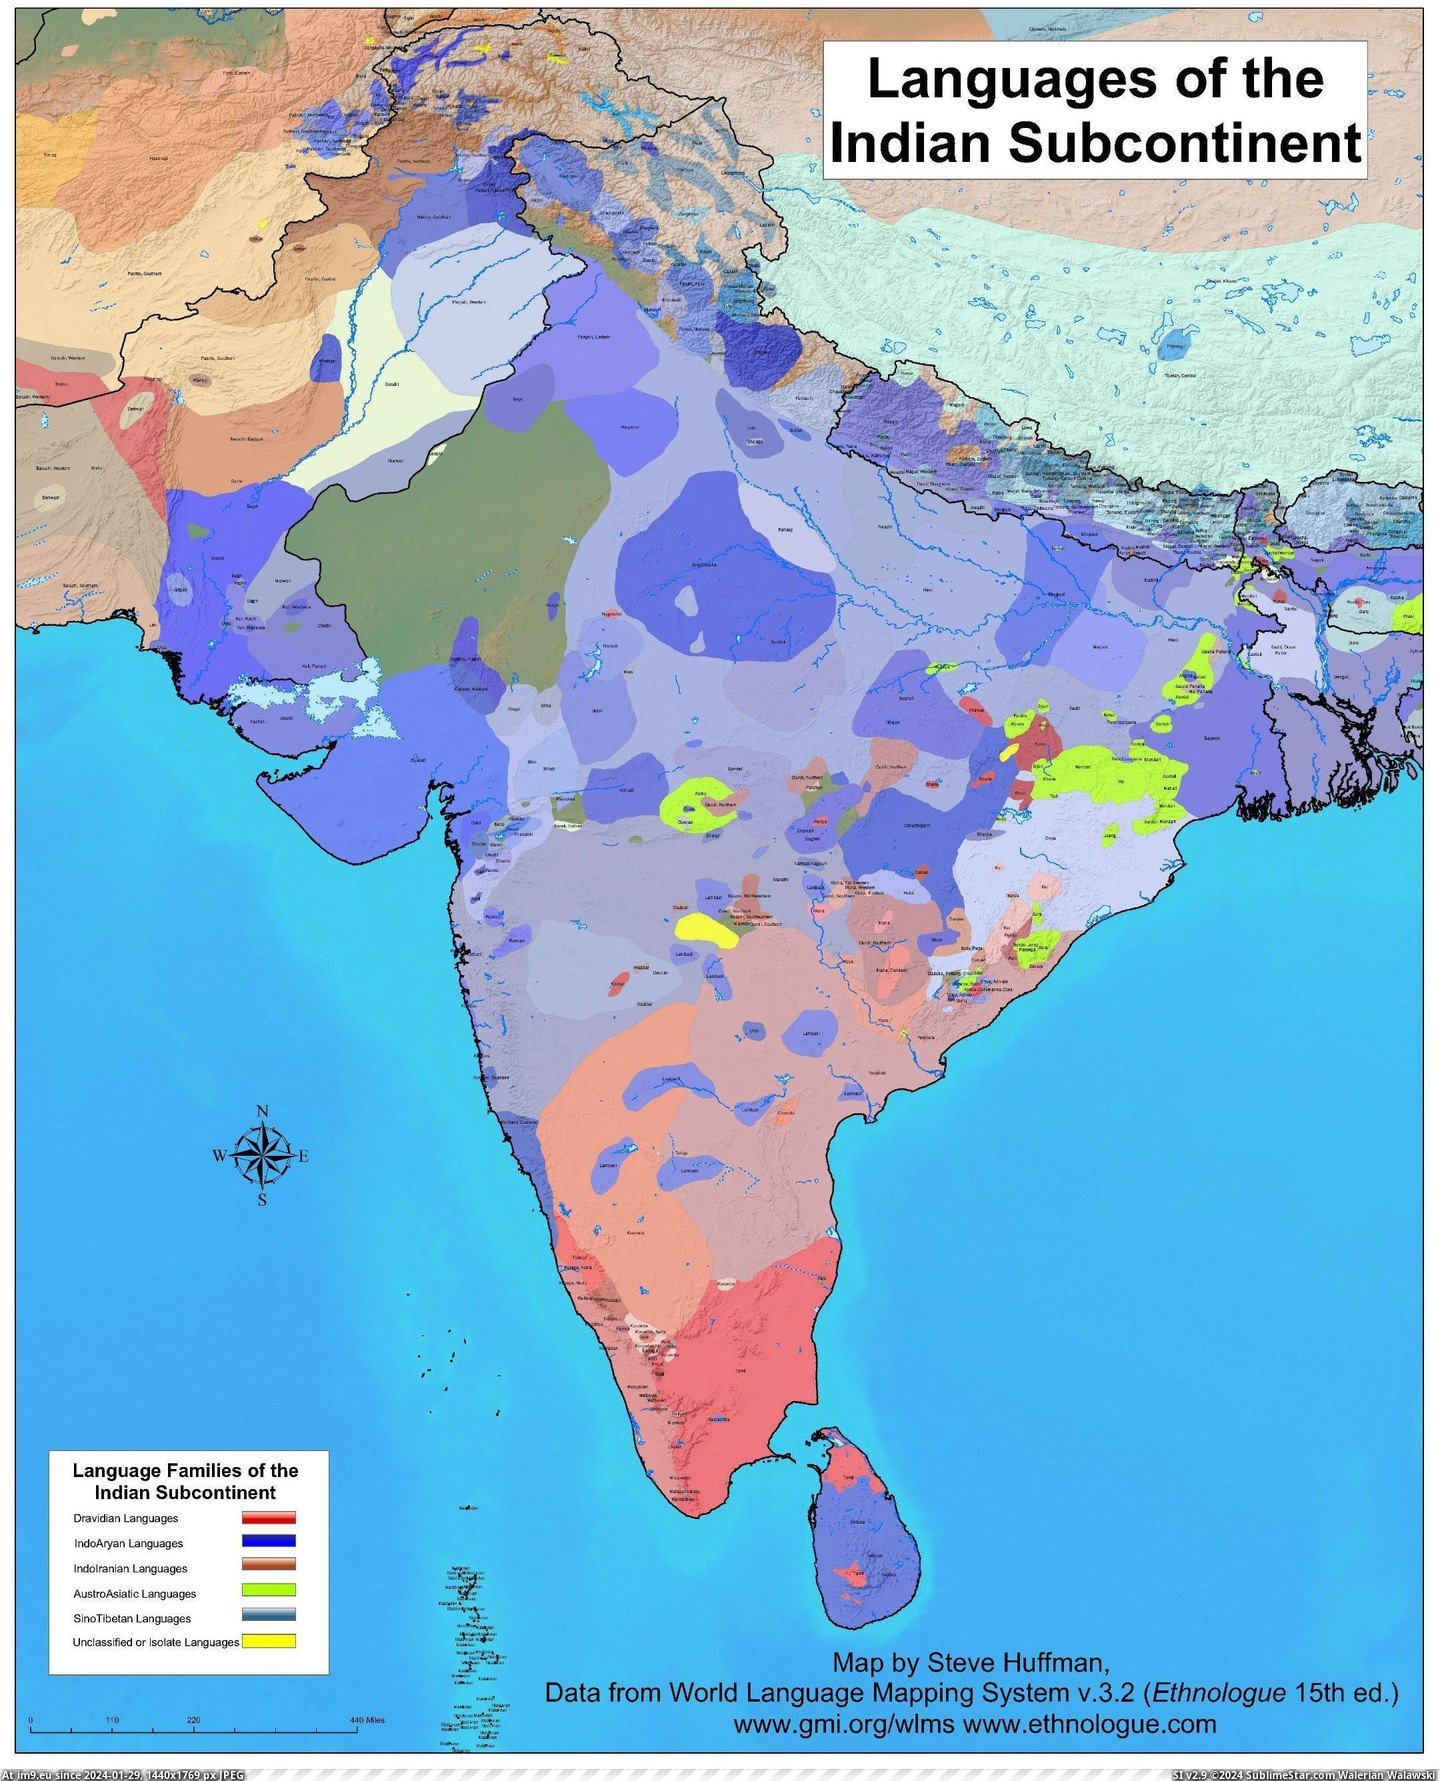 #Indian #Subcontinent #Languages [Mapporn] Languages of the Indian subcontinent [3600x4400] Pic. (Bild von album My r/MAPS favs))